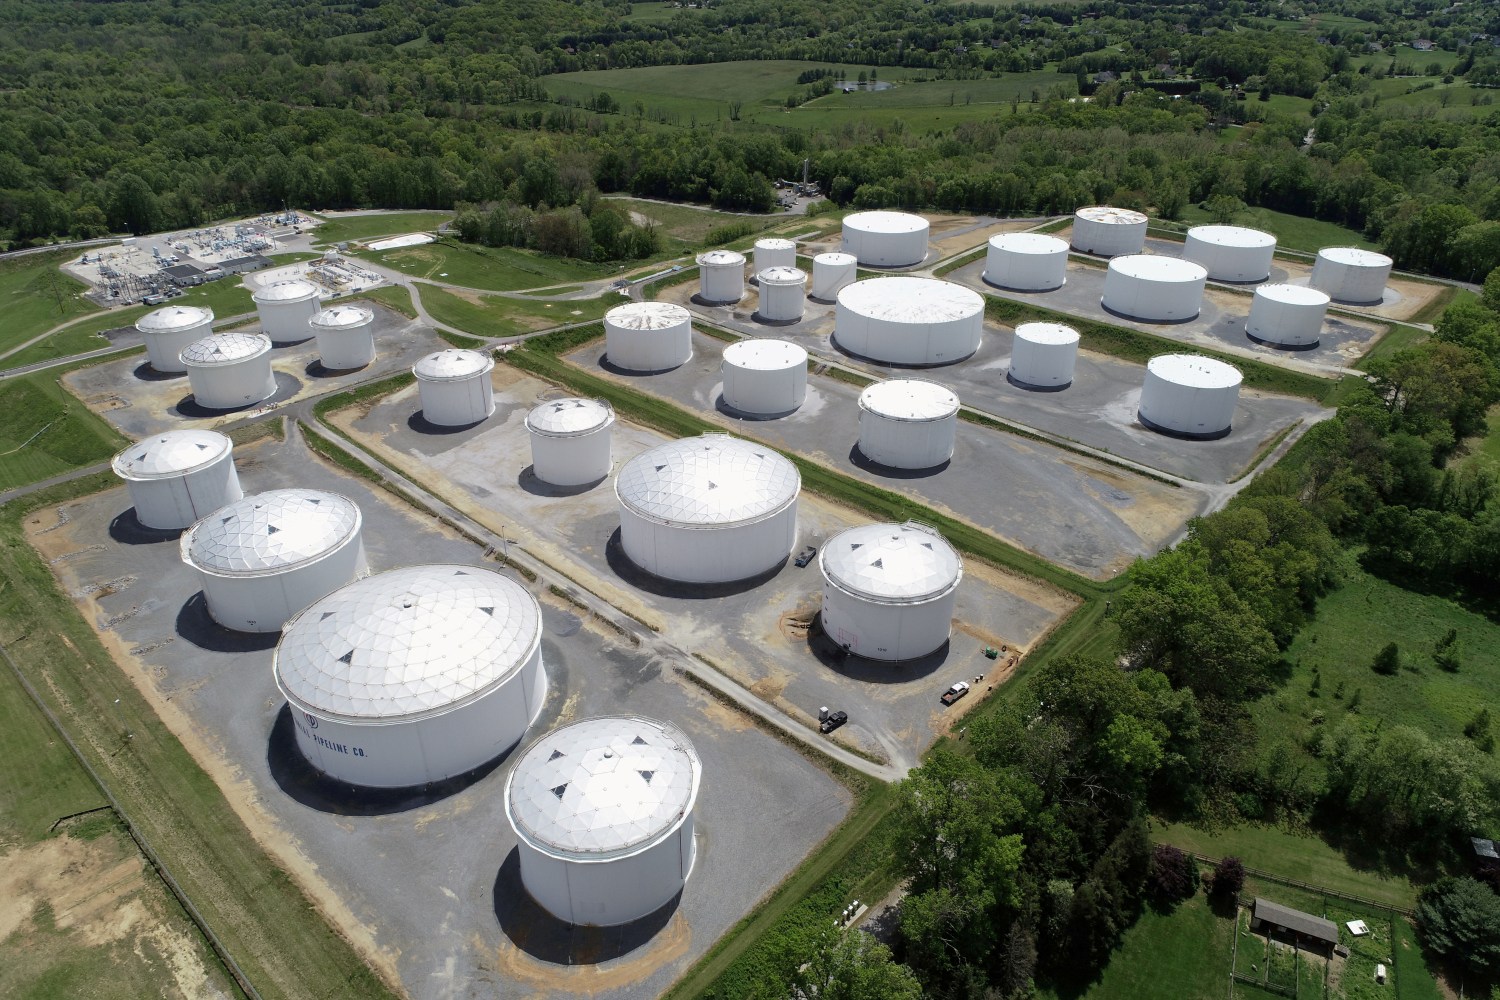 FILE PHOTO: Holding tanks are seen in an aerial photograph at Colonial Pipeline's Dorsey Junction Station in Woodbine, Maryland, U.S. May 10, 2021. REUTERS/Drone Base/File Photo/File Photo